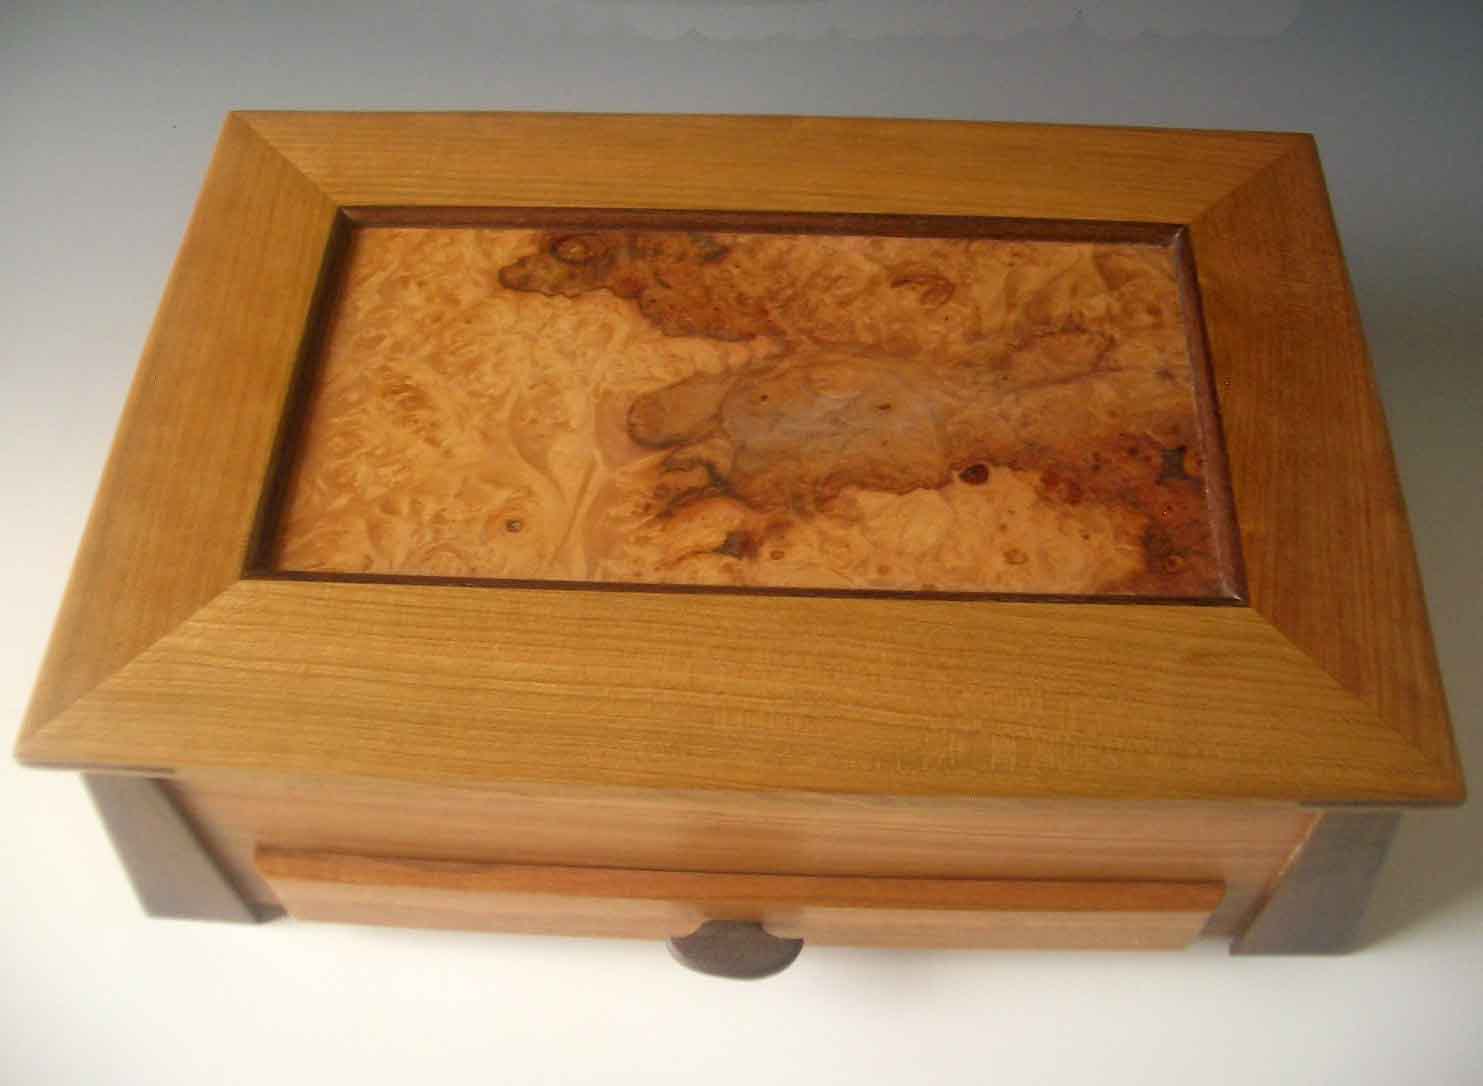 Handmade large wooden jewelry box made of cherry wood and spalted maple burl